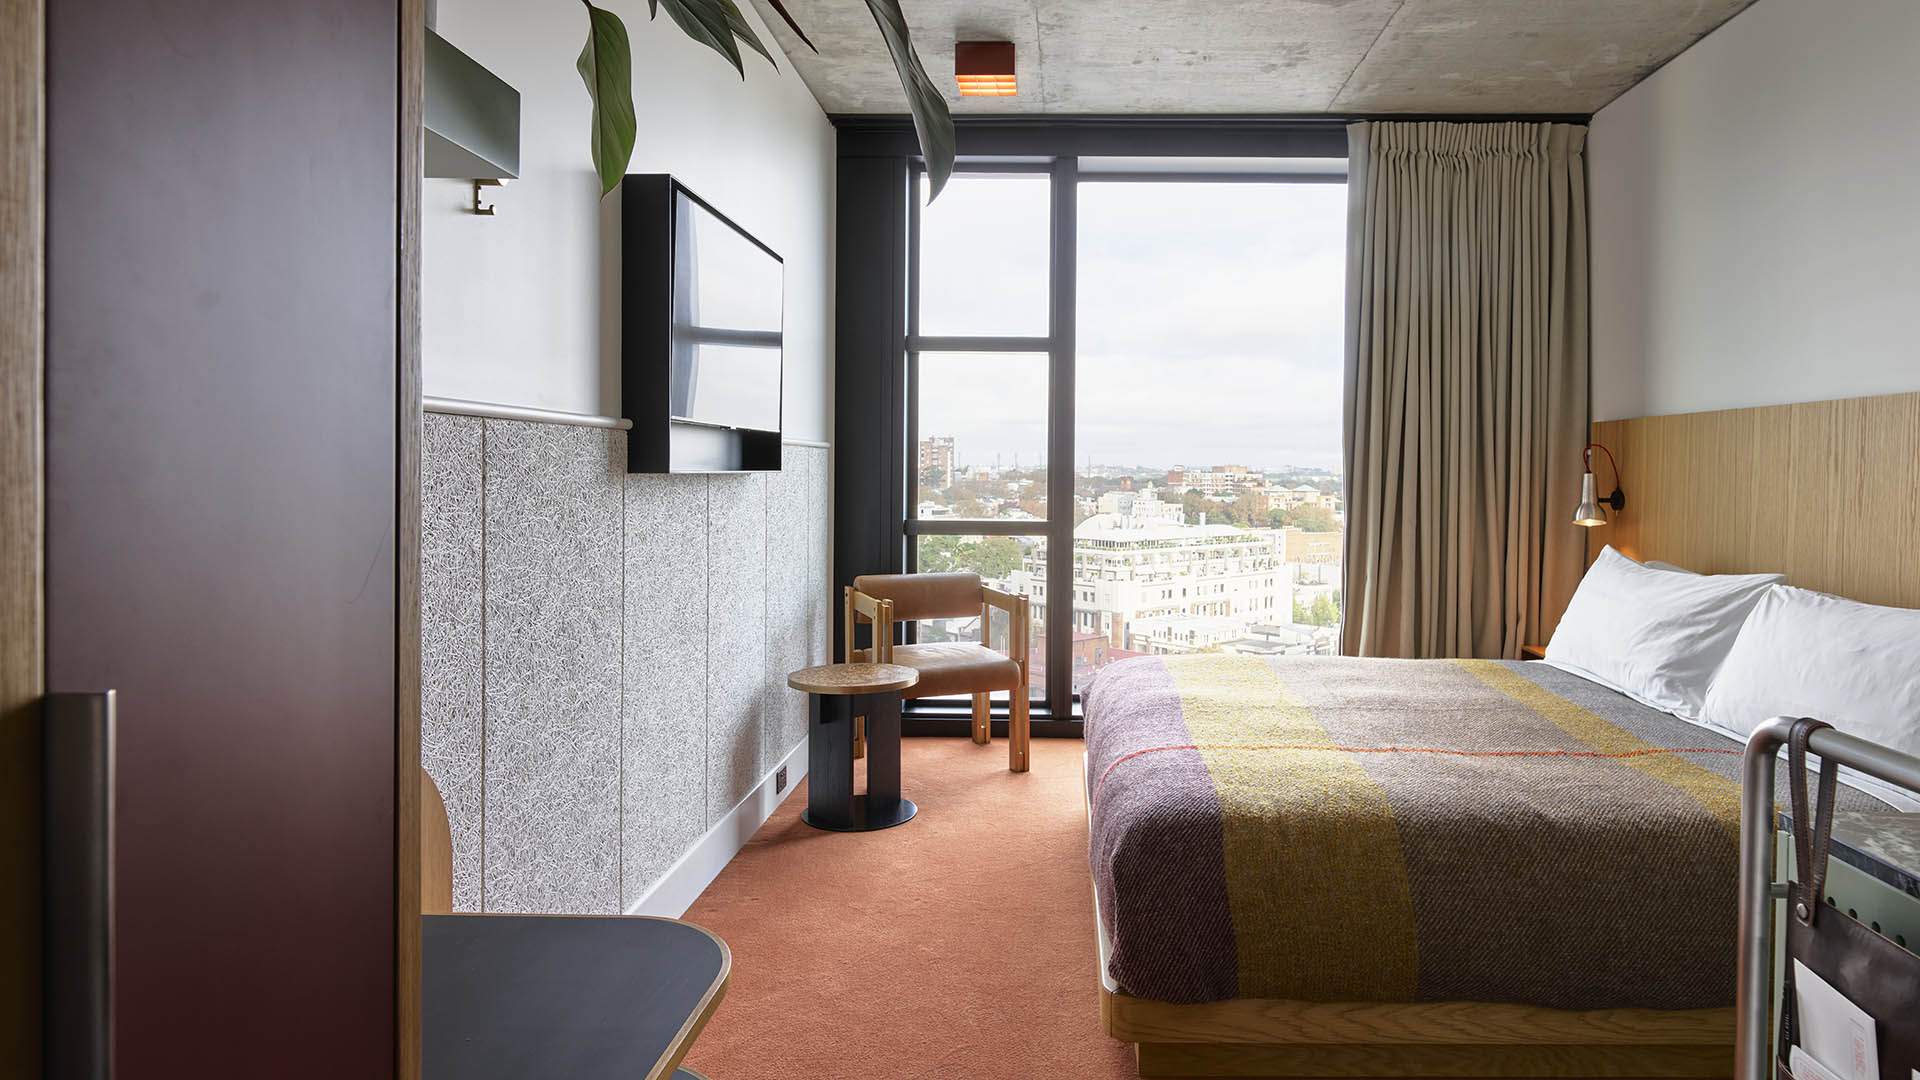 The Southern Hemisphere's First-Ever Super-Sleek Ace Hotel Has Finally Opened Its Doors in Sydney